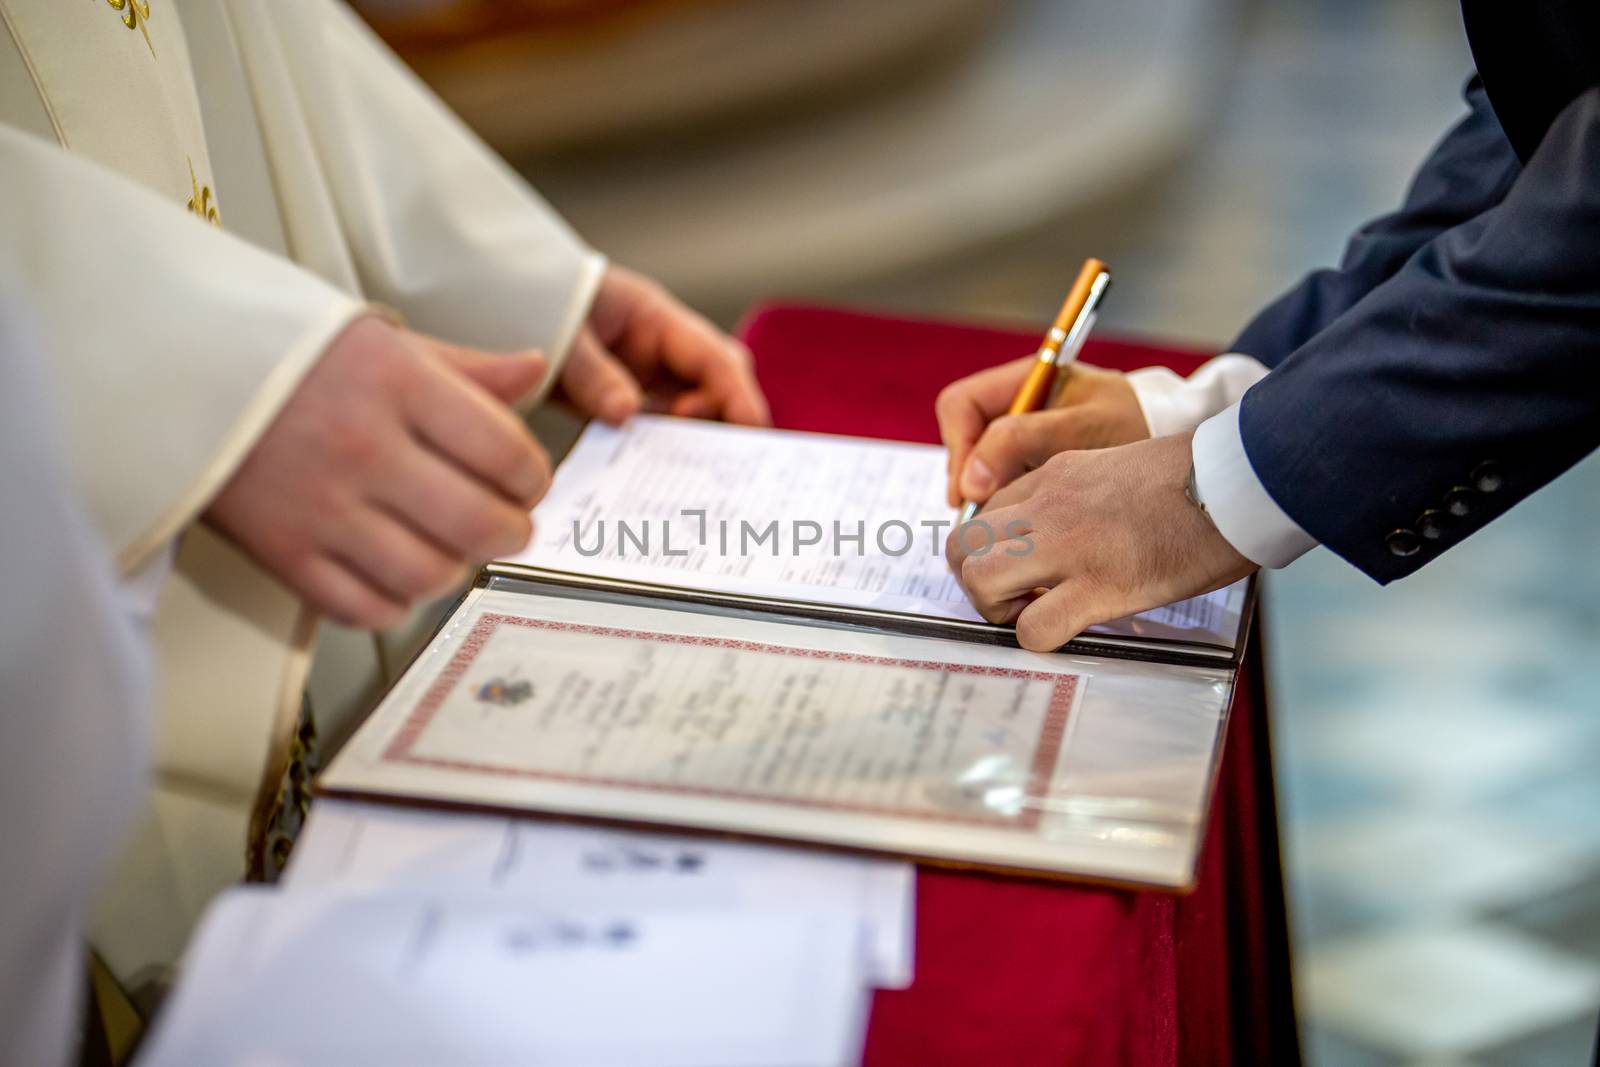 The groom signs documents on registration of marriage in the presence of the pastor. Young couple signs wedding documents in the church during wedding ceremony, Latvia